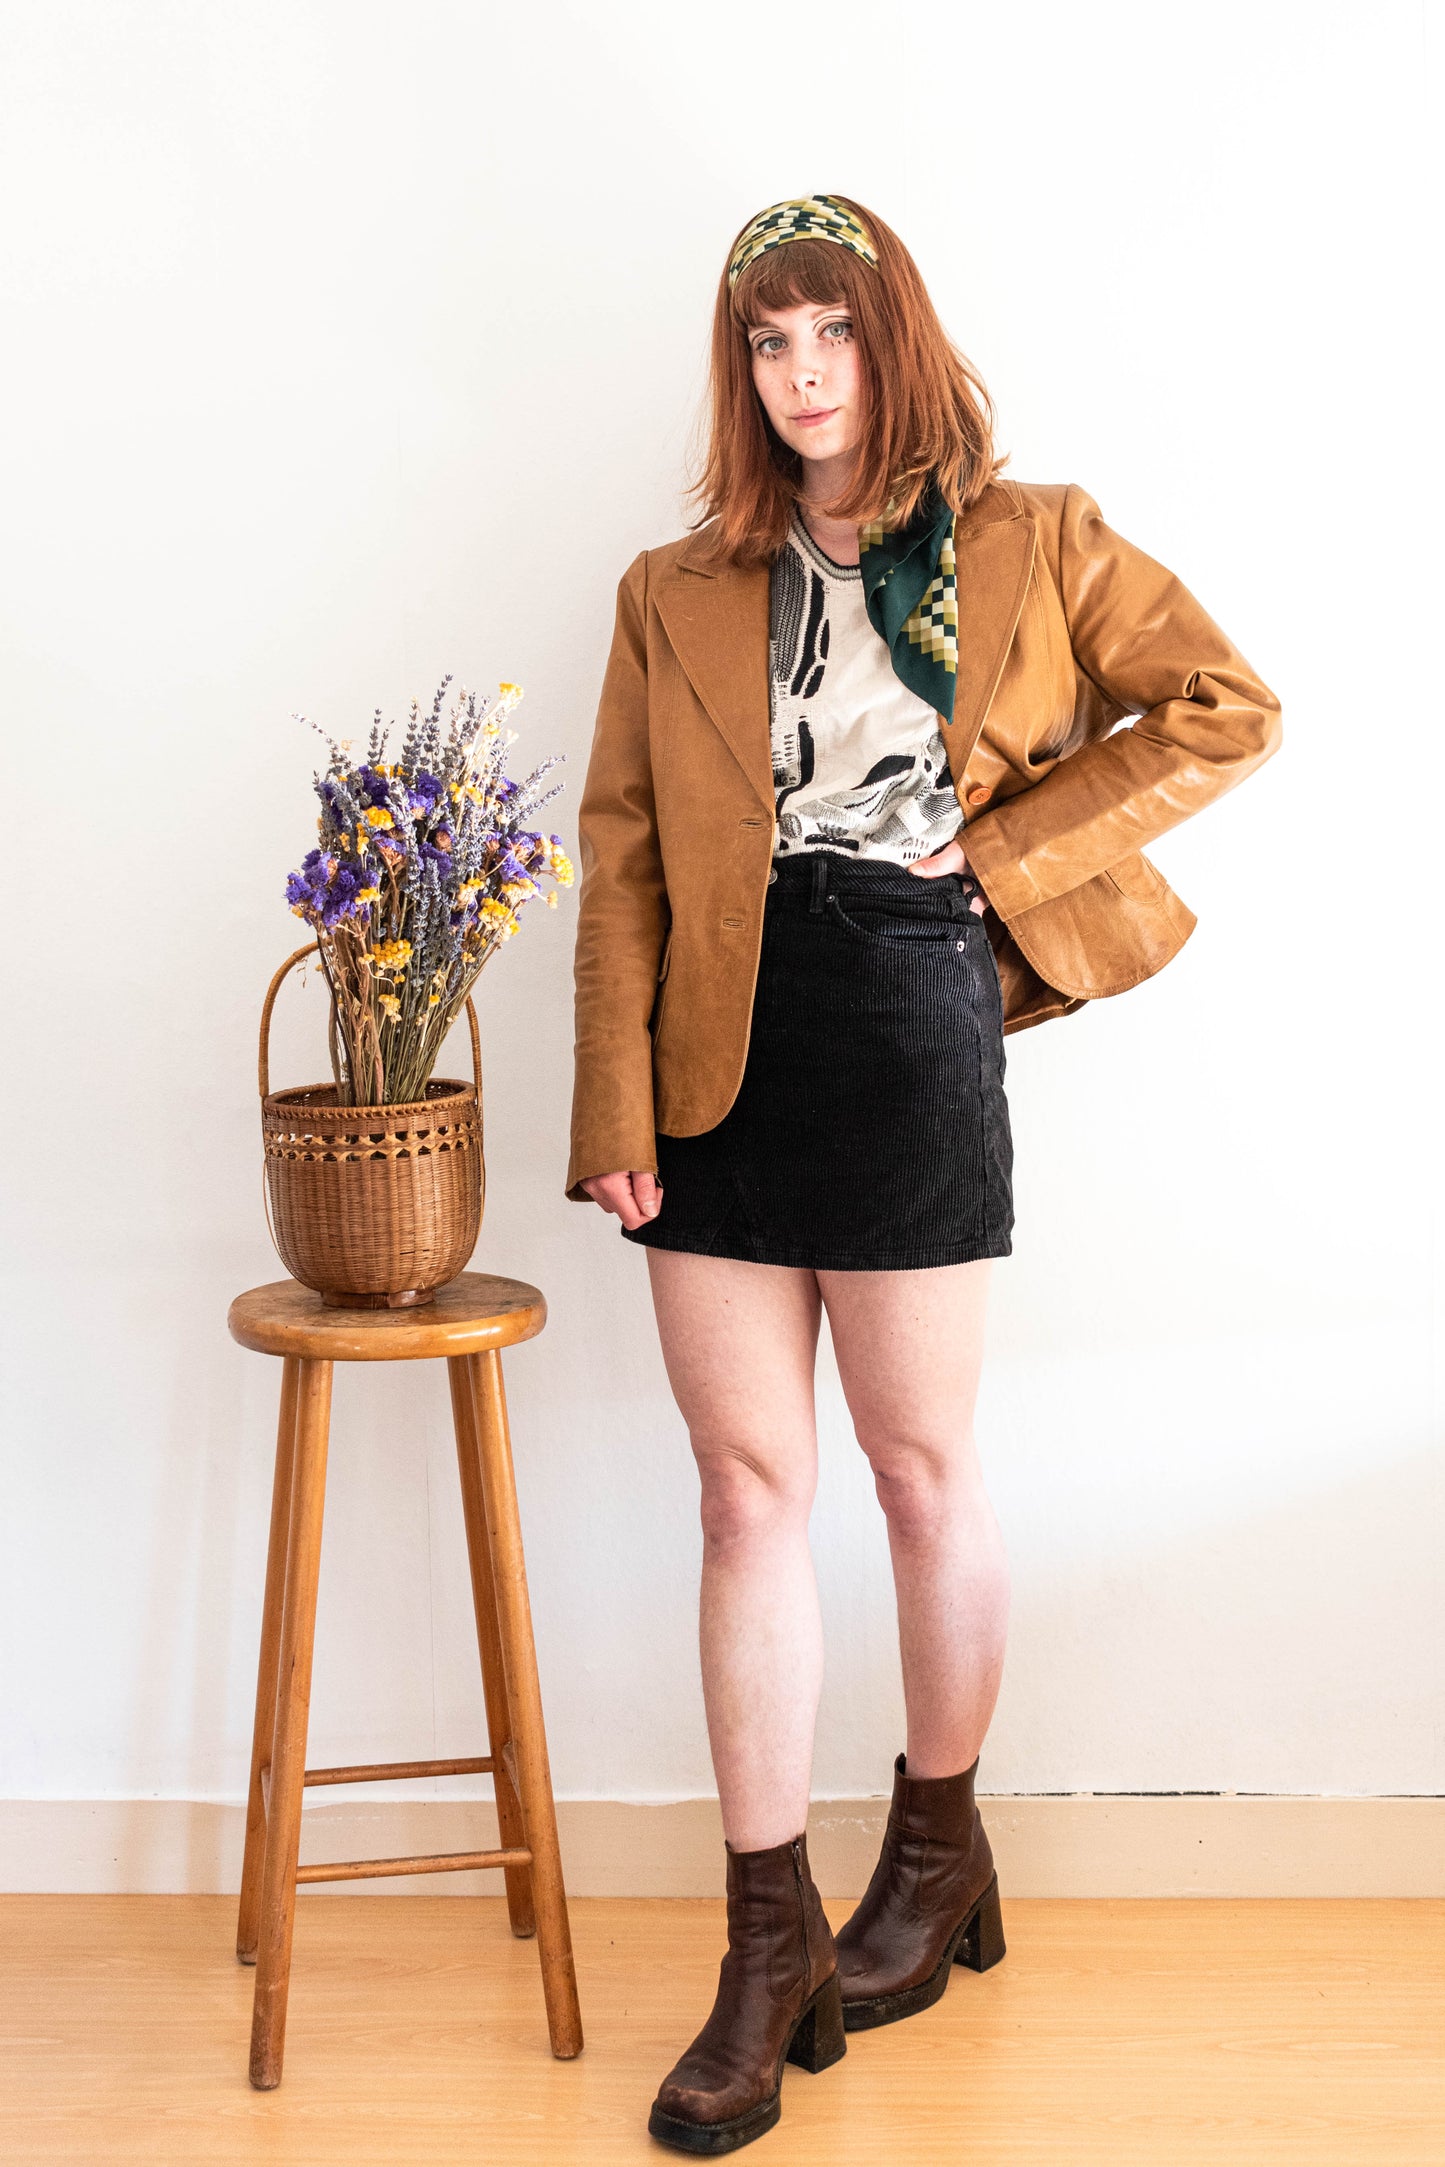 NEW IN! Leather jacket